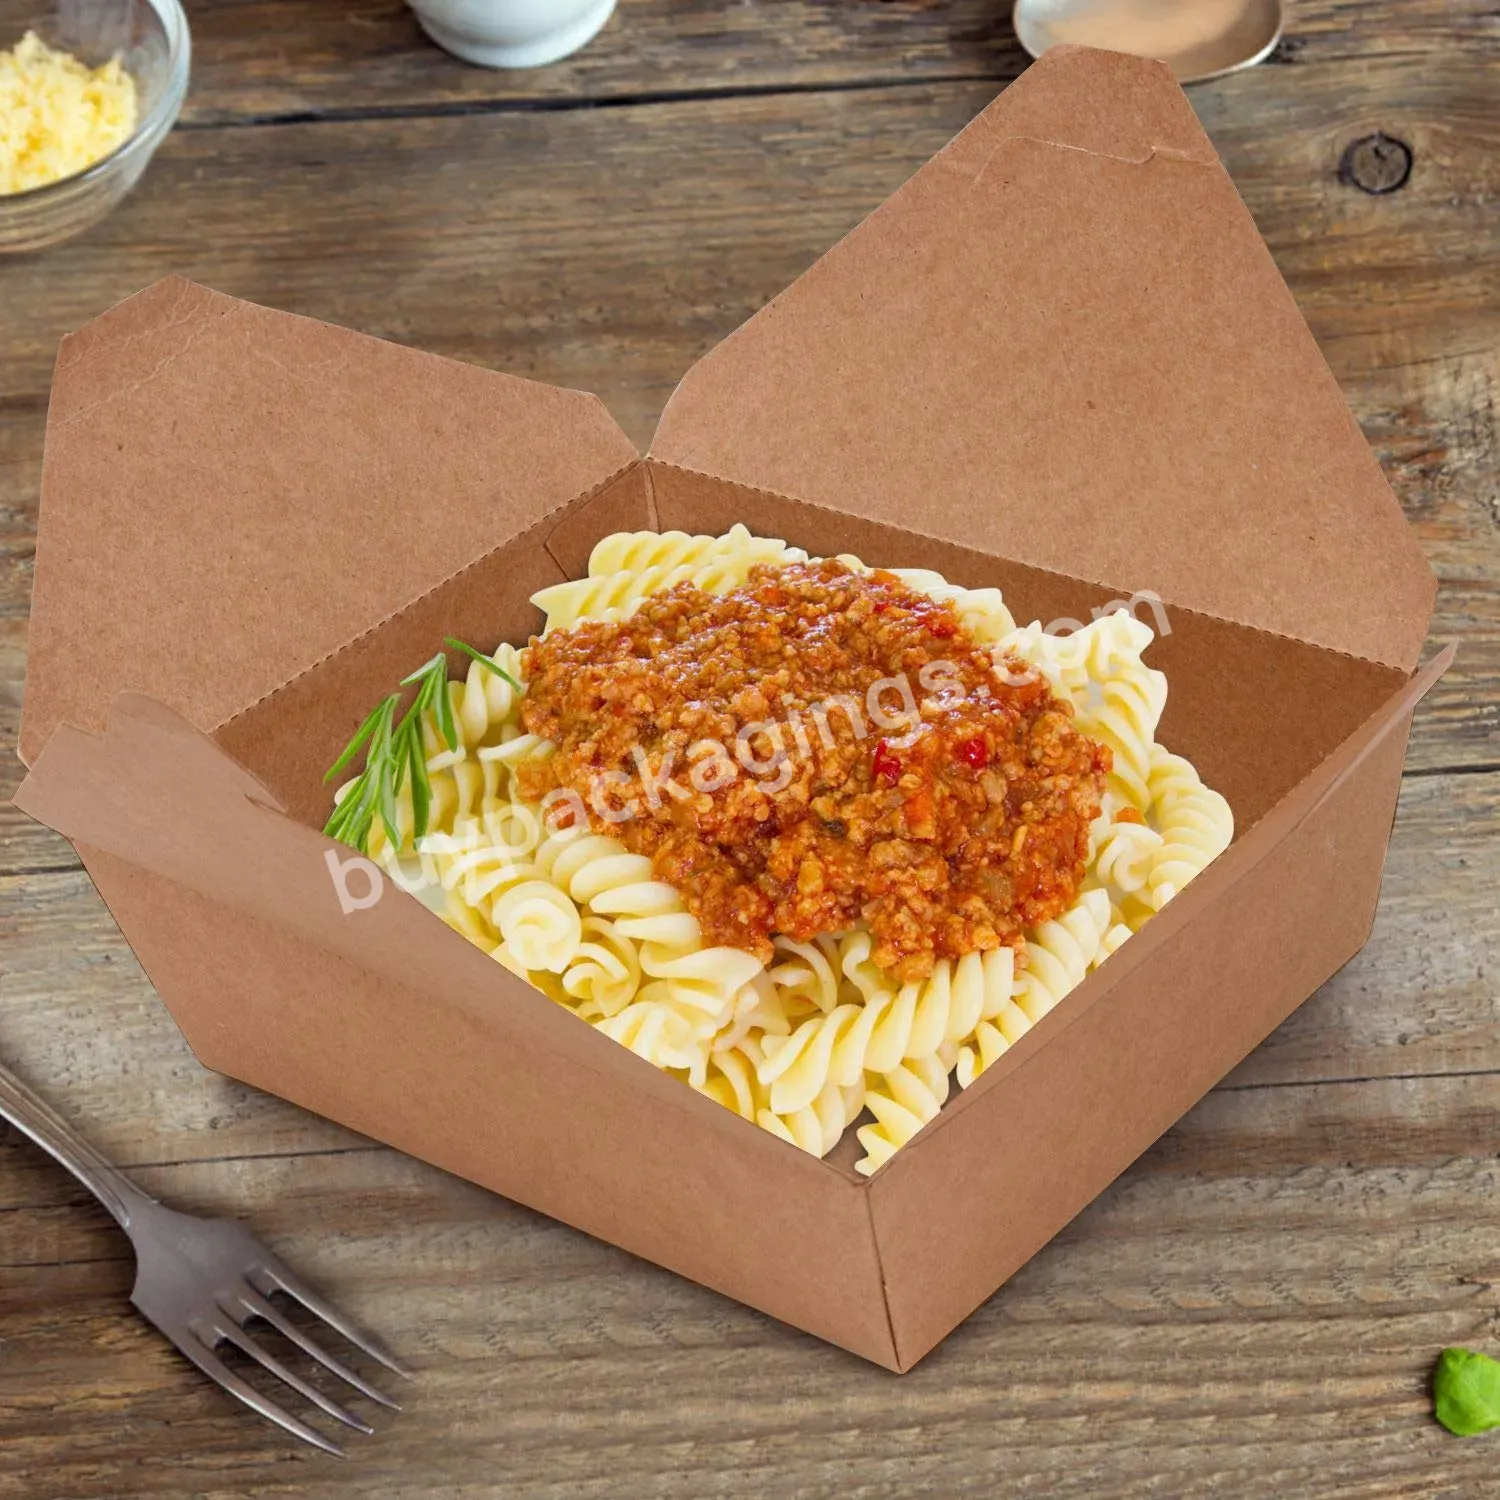 Take Out Food Containers Disposable Kraft Paper Food Container Takeout Box Microwaveble Food Carton Box Oem - Buy Takeout Food Box,Food Carton Box,Bagasse Fast Food Box.